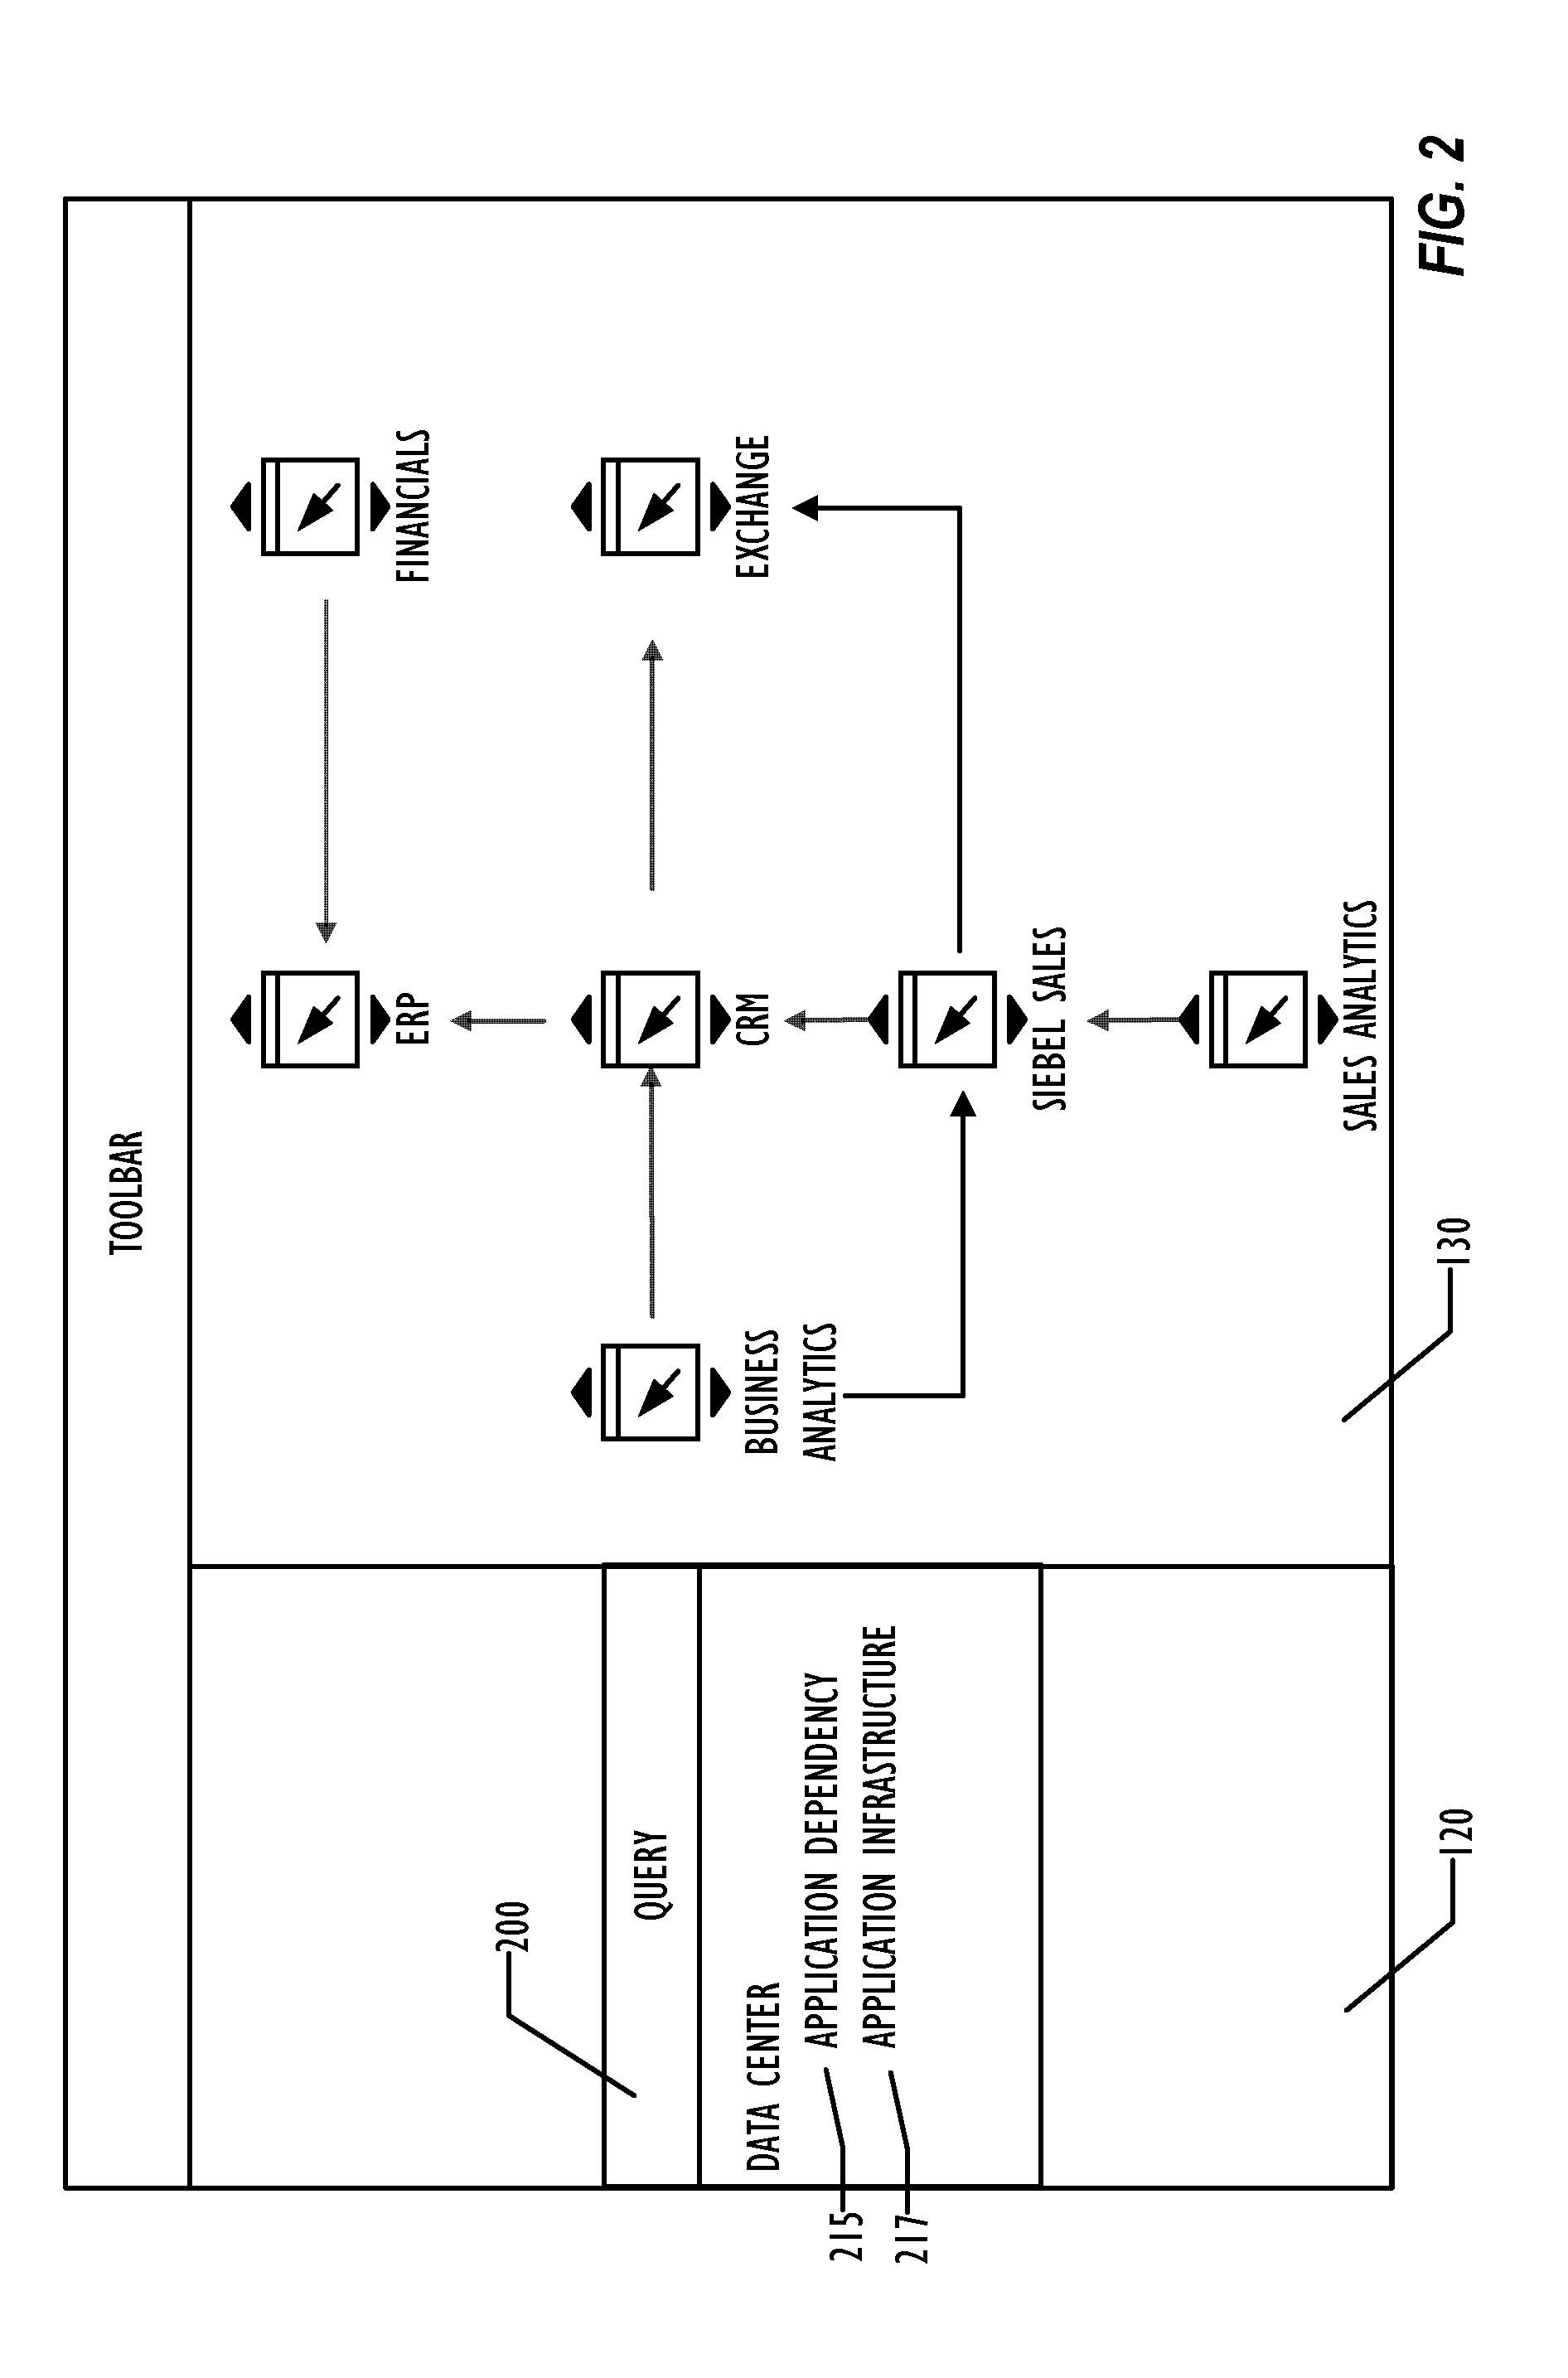 Mechanism to display graphical IT infrastructure using configurable smart navigation